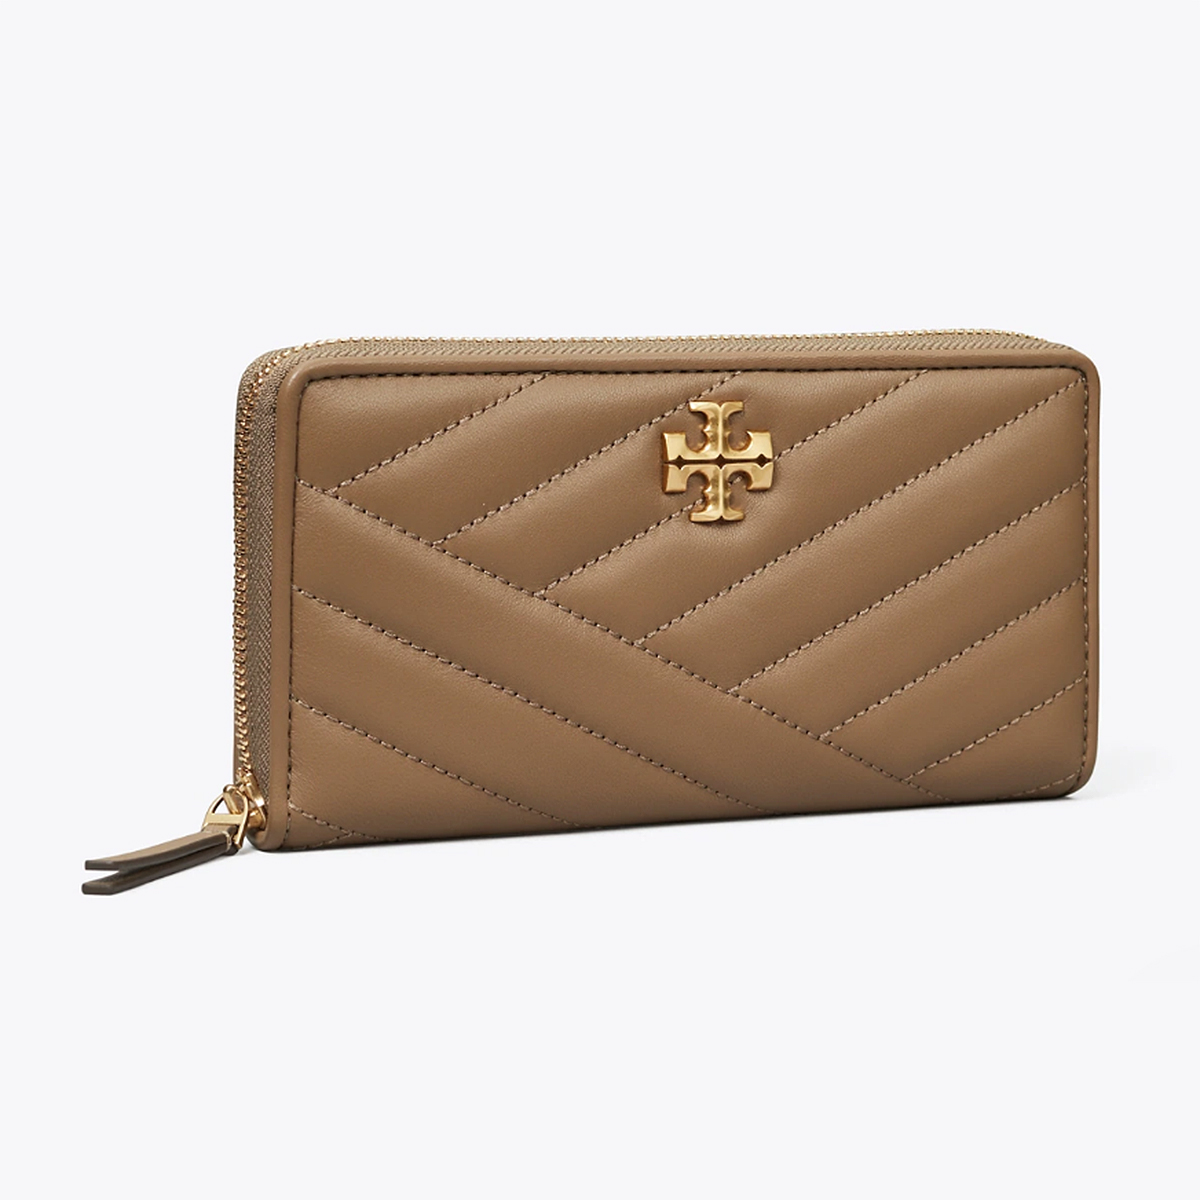 Tory Burch Black Friday Finds — Up to 50% off